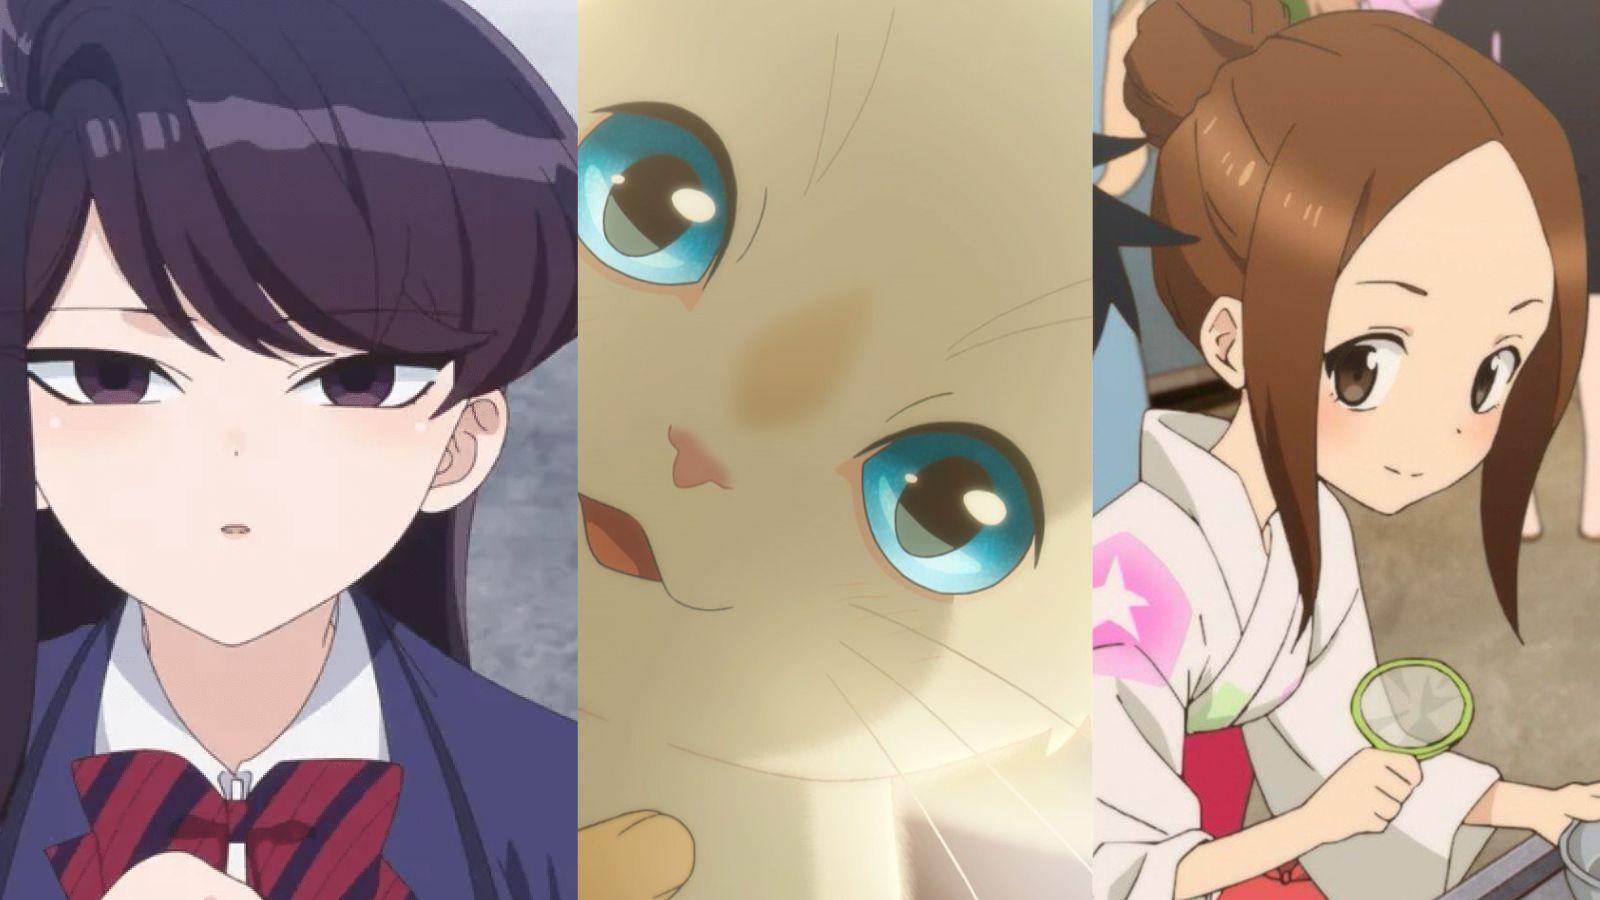 10 Best Romantic Anime Movies That You Can Watch On Netflix